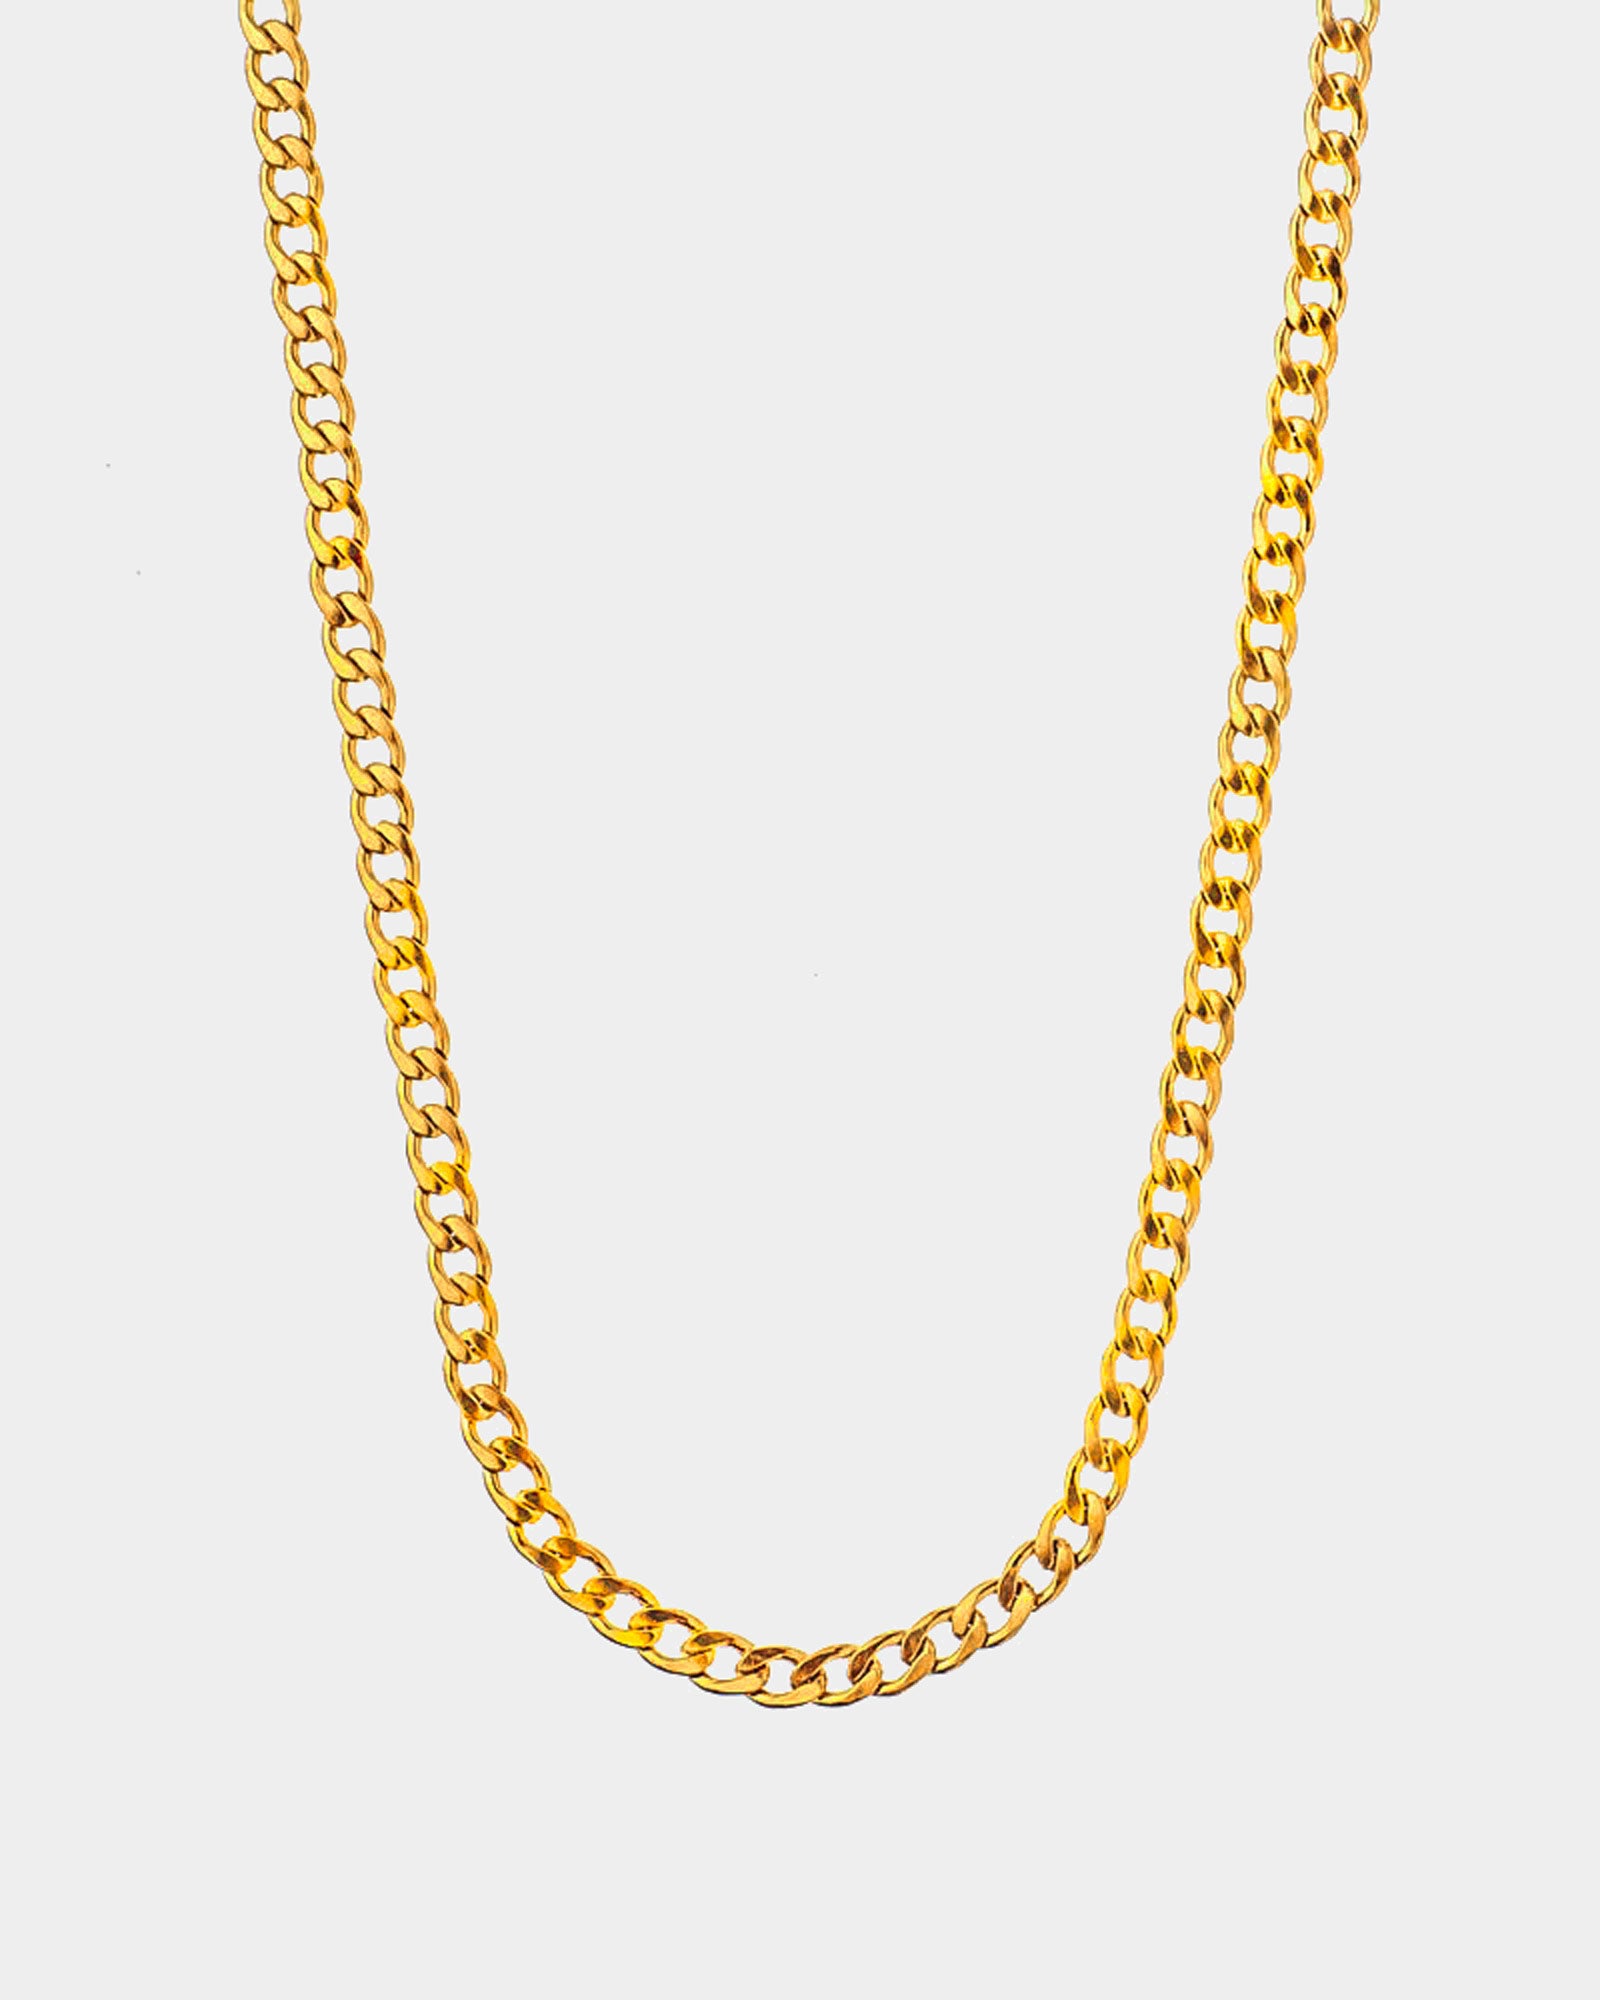 Vegas Necklace - Gold Stainless Steel Necklace - Online Unissex Jewelry - Dicci